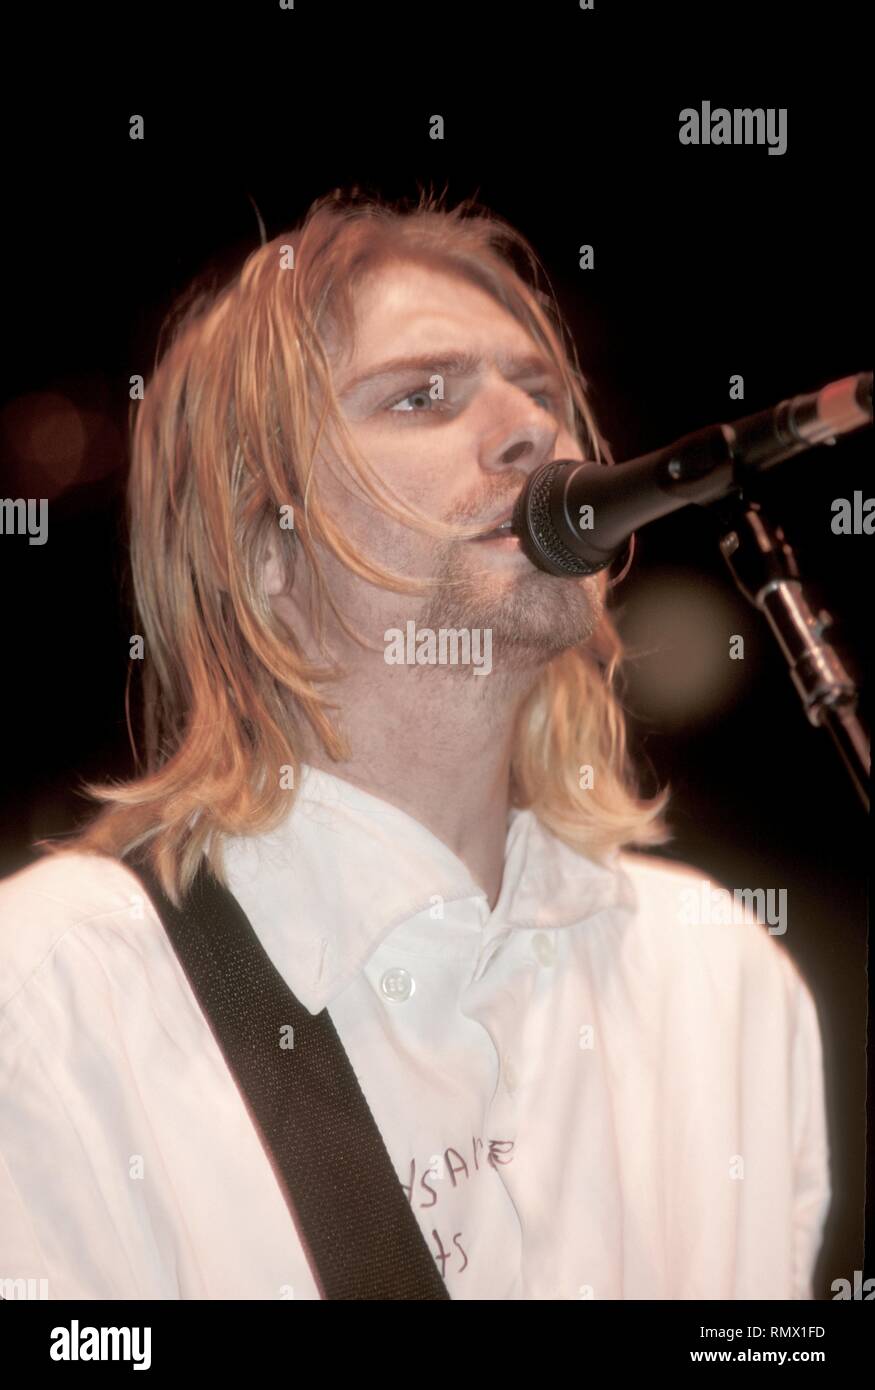 Singer and guitarist Kurt Cobain of the rock band Nirvana is shown performing on stage during a 'live' concert appearance. Stock Photo